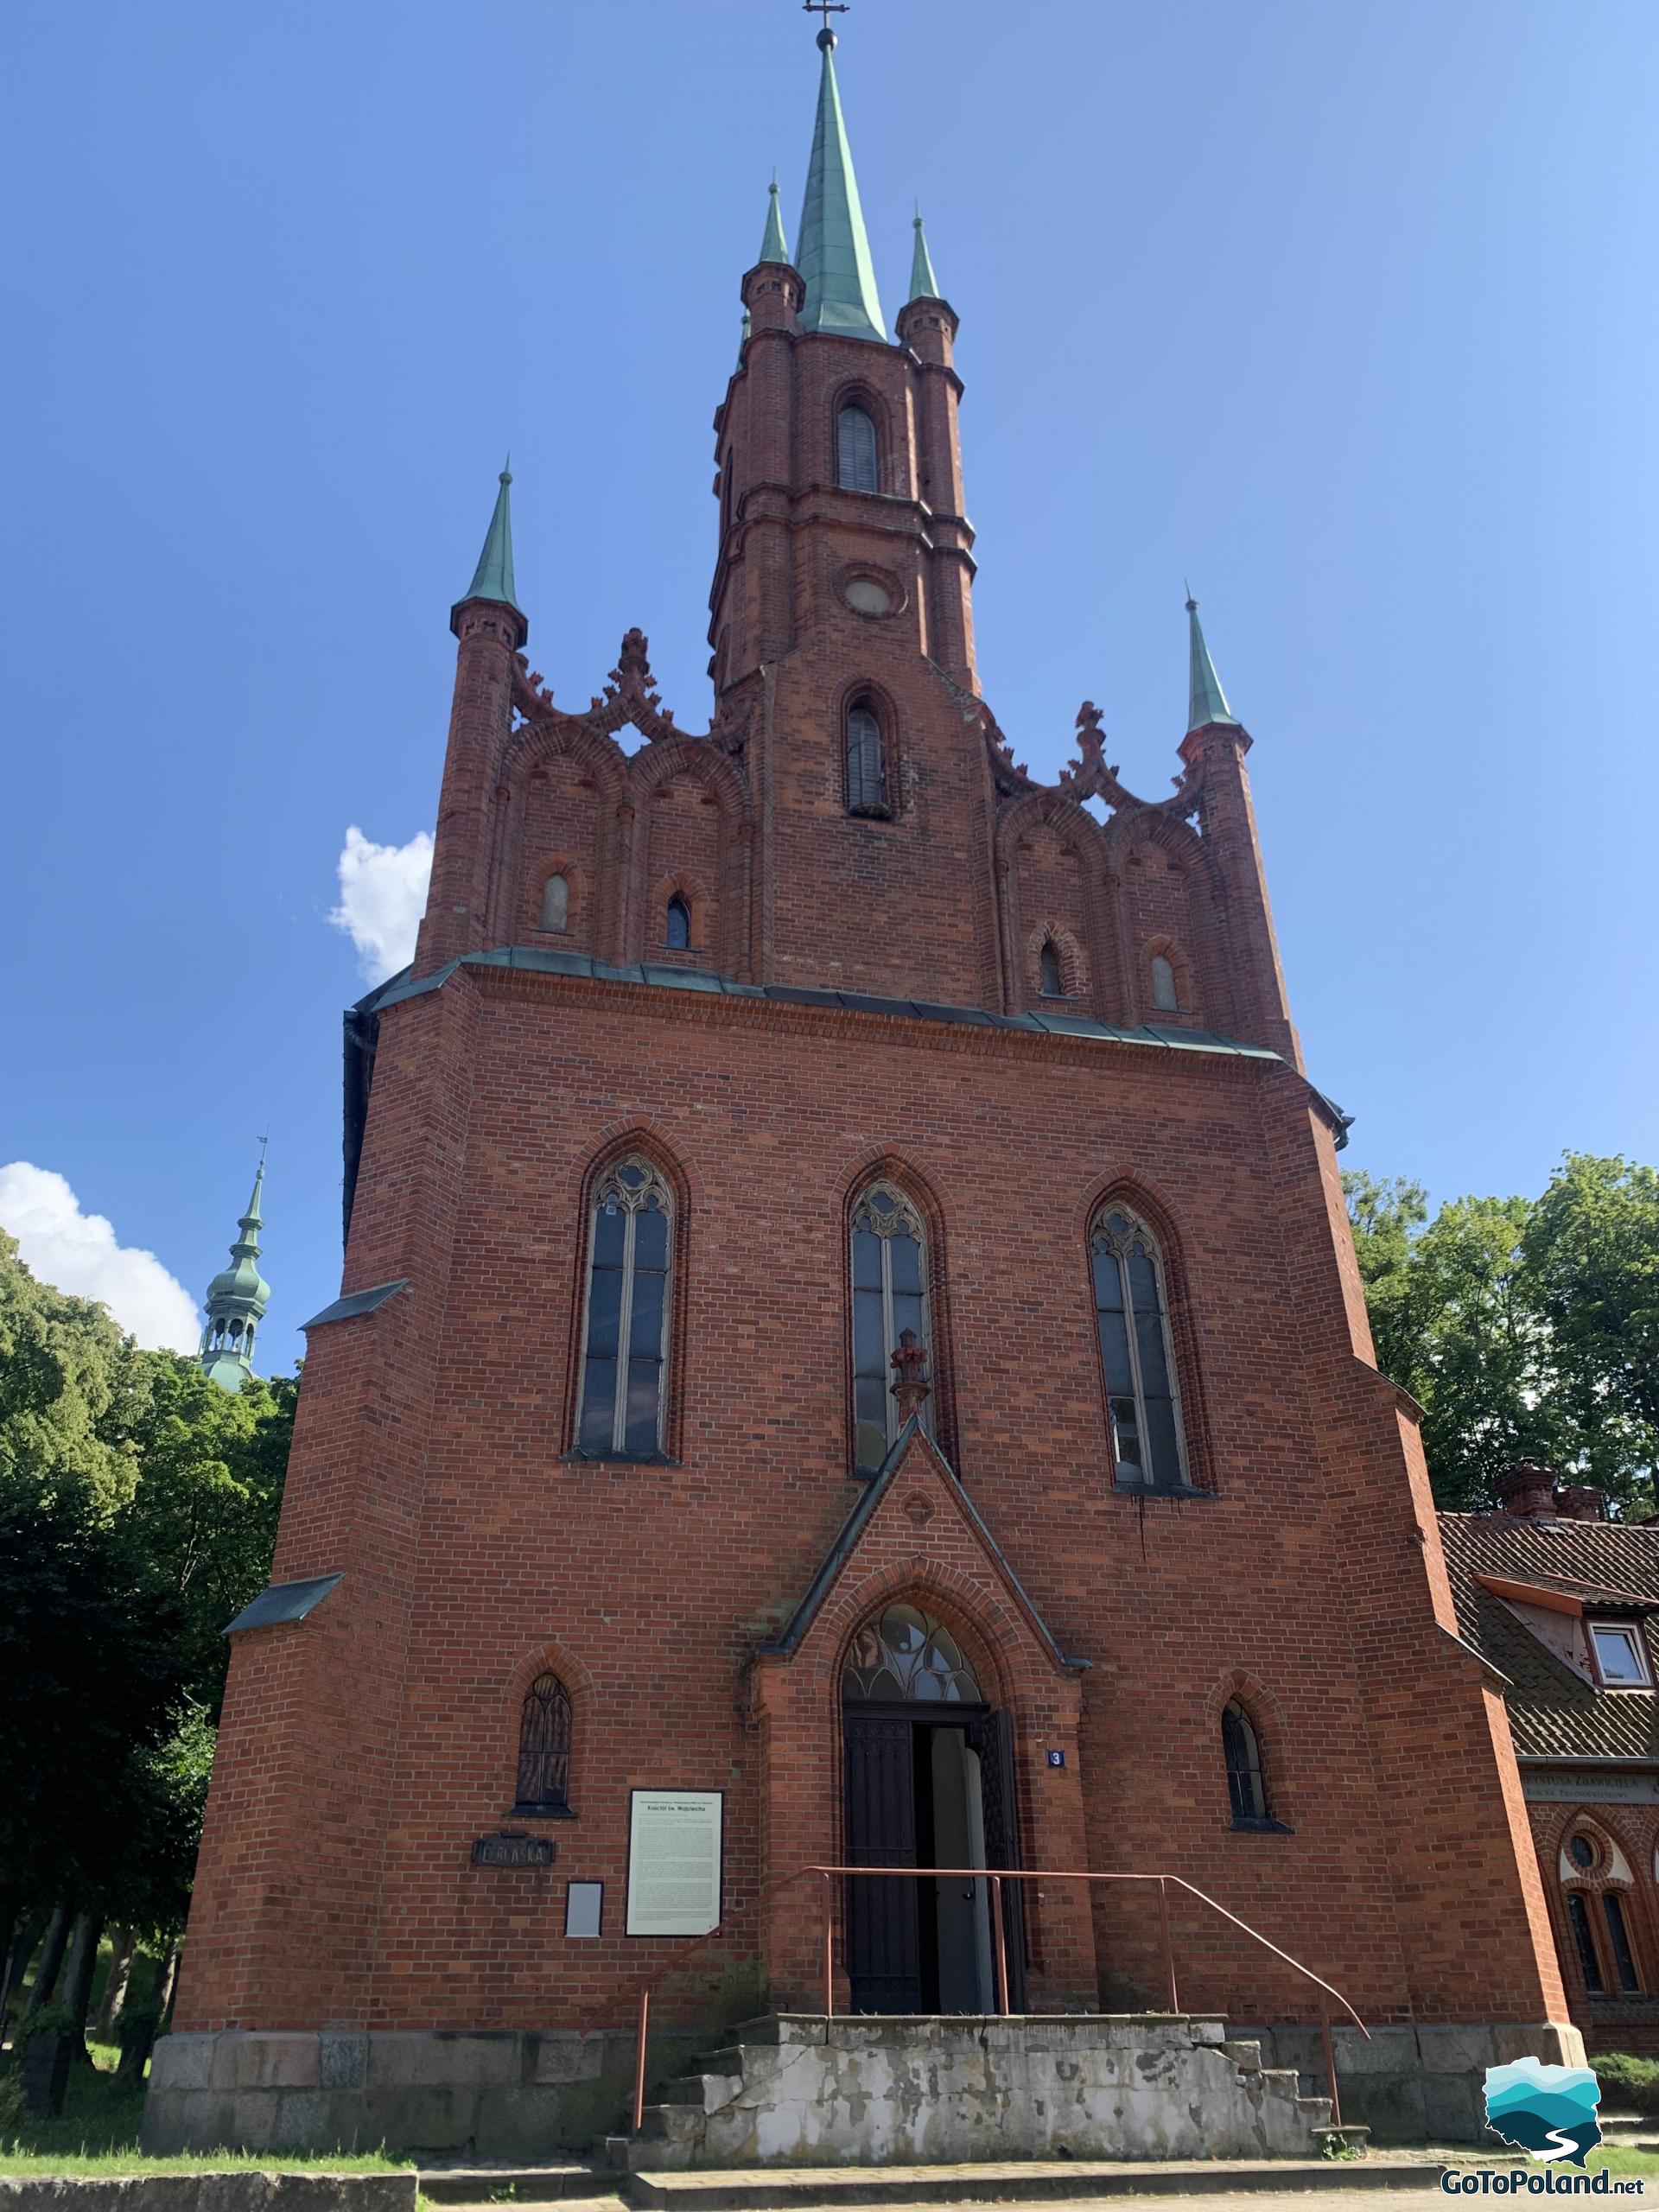 a church made of red brick